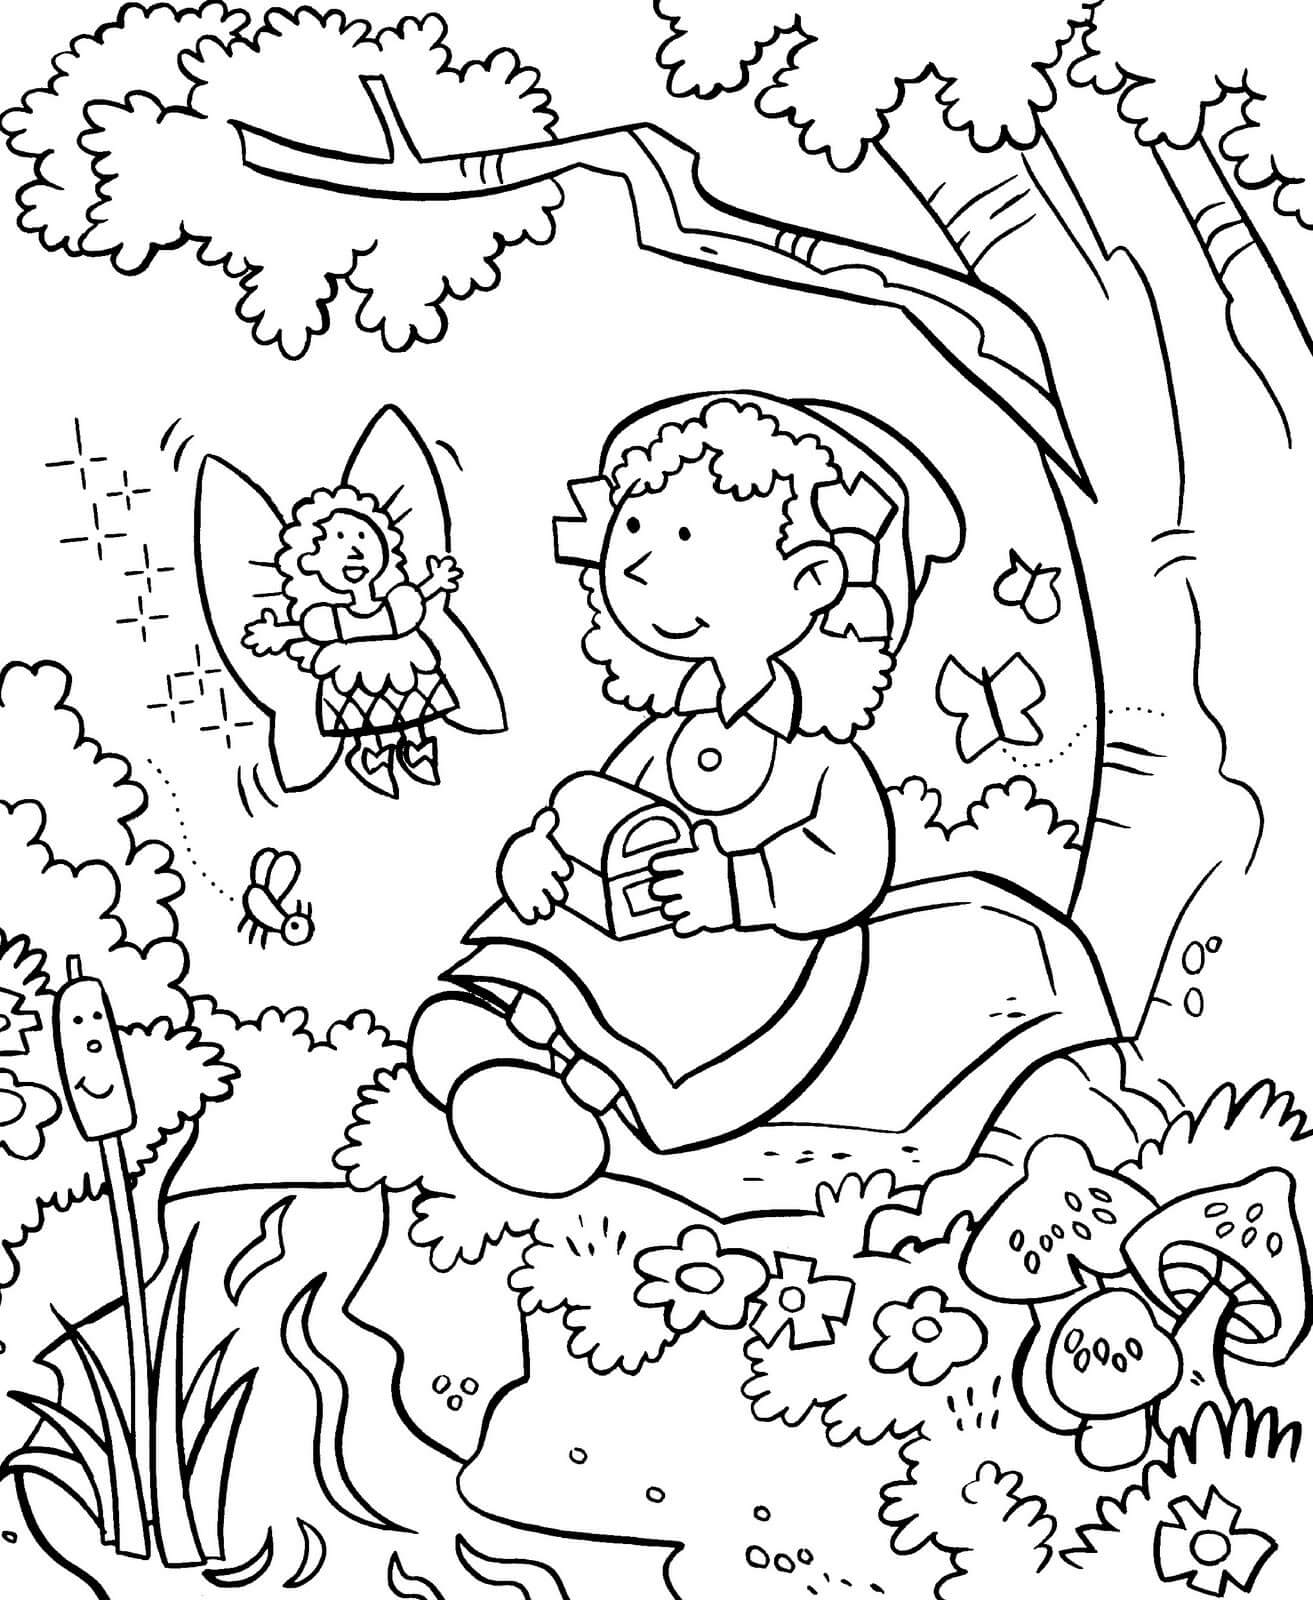 Fairy in Garden Coloring Page